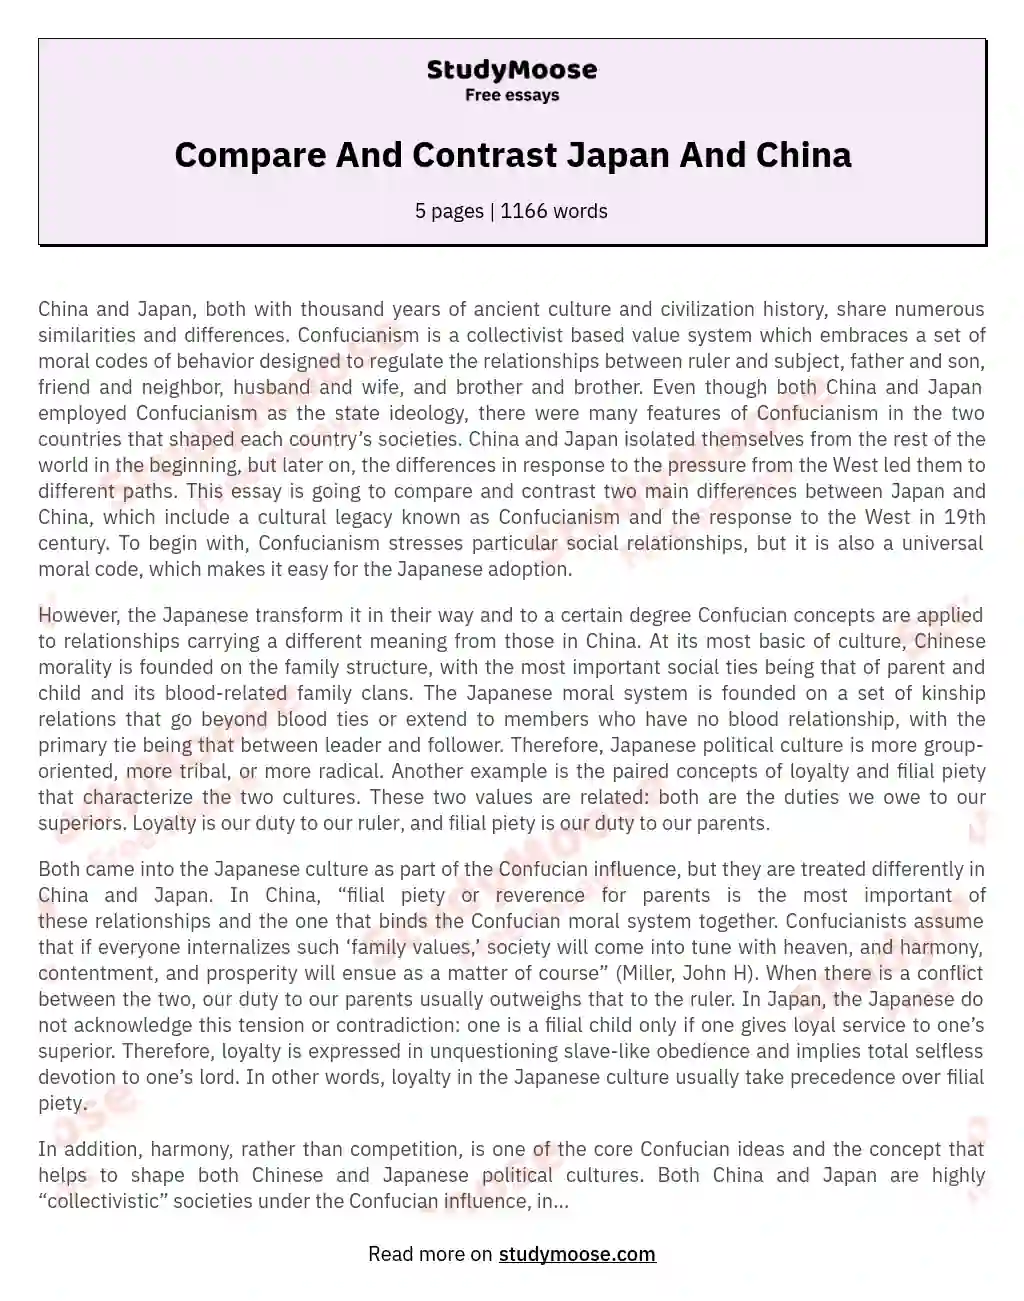 Compare And Contrast Japan And China essay